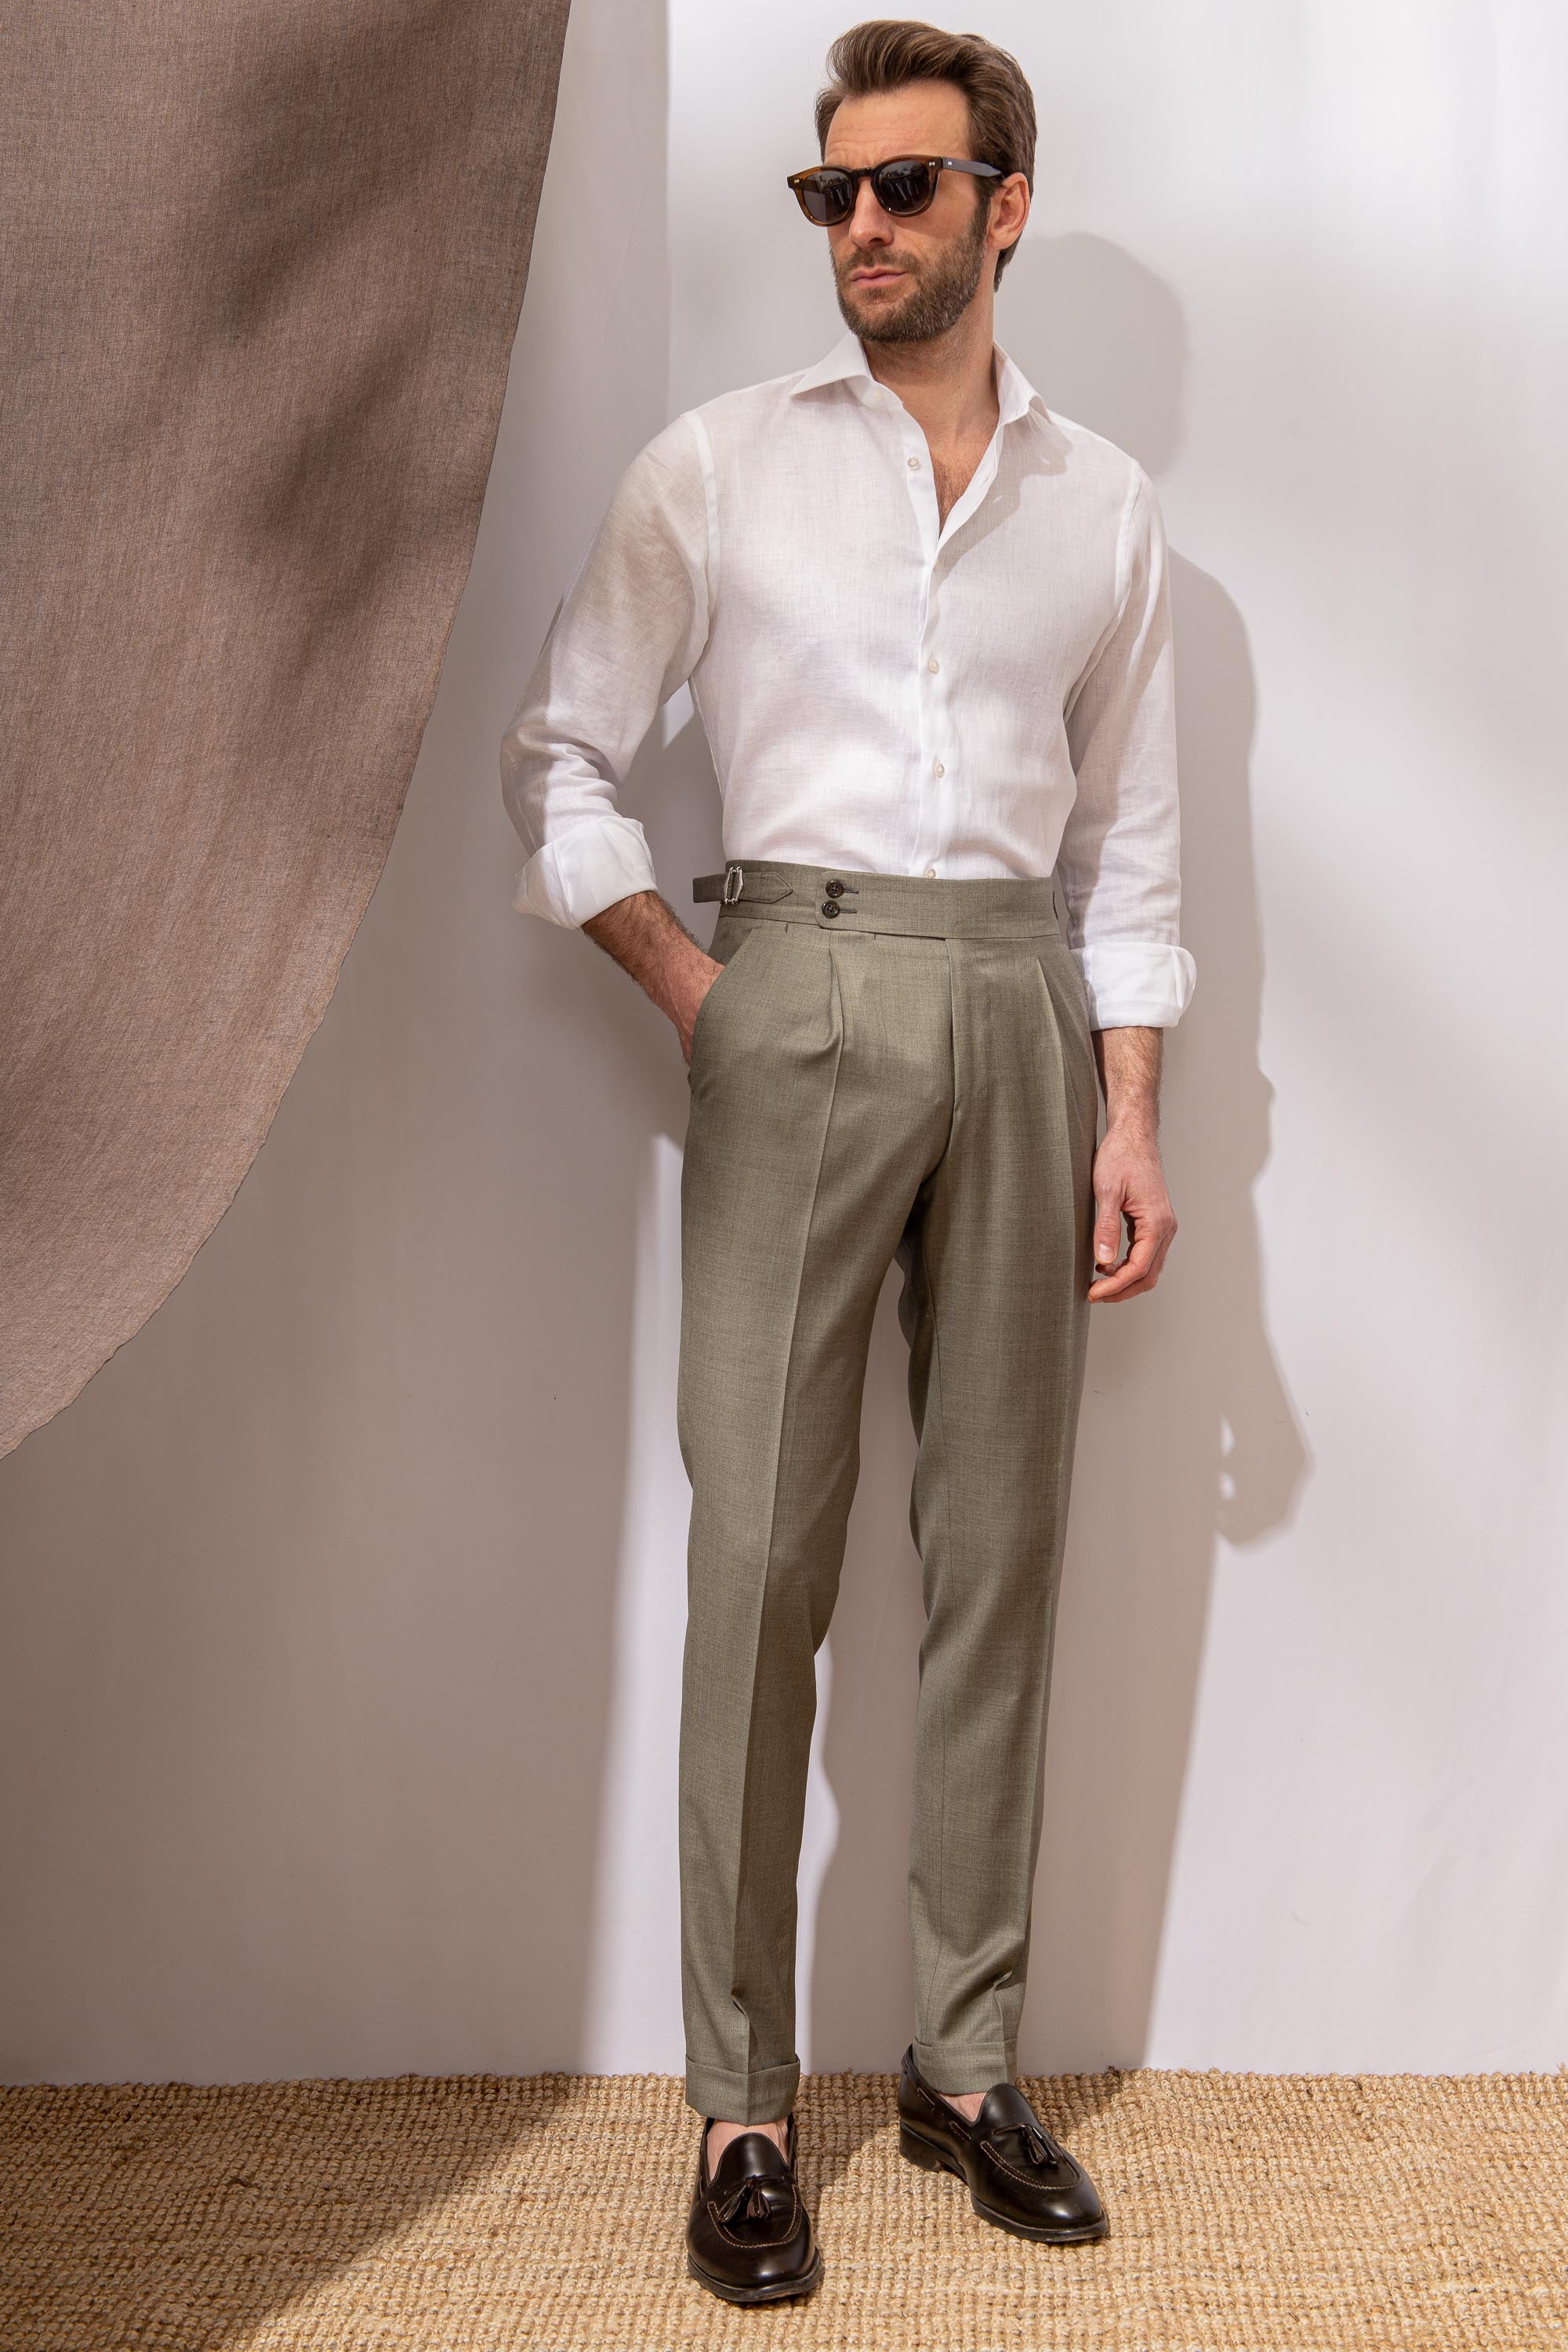 Green trousers "Soragna Capsule Collection" - Made in Italy